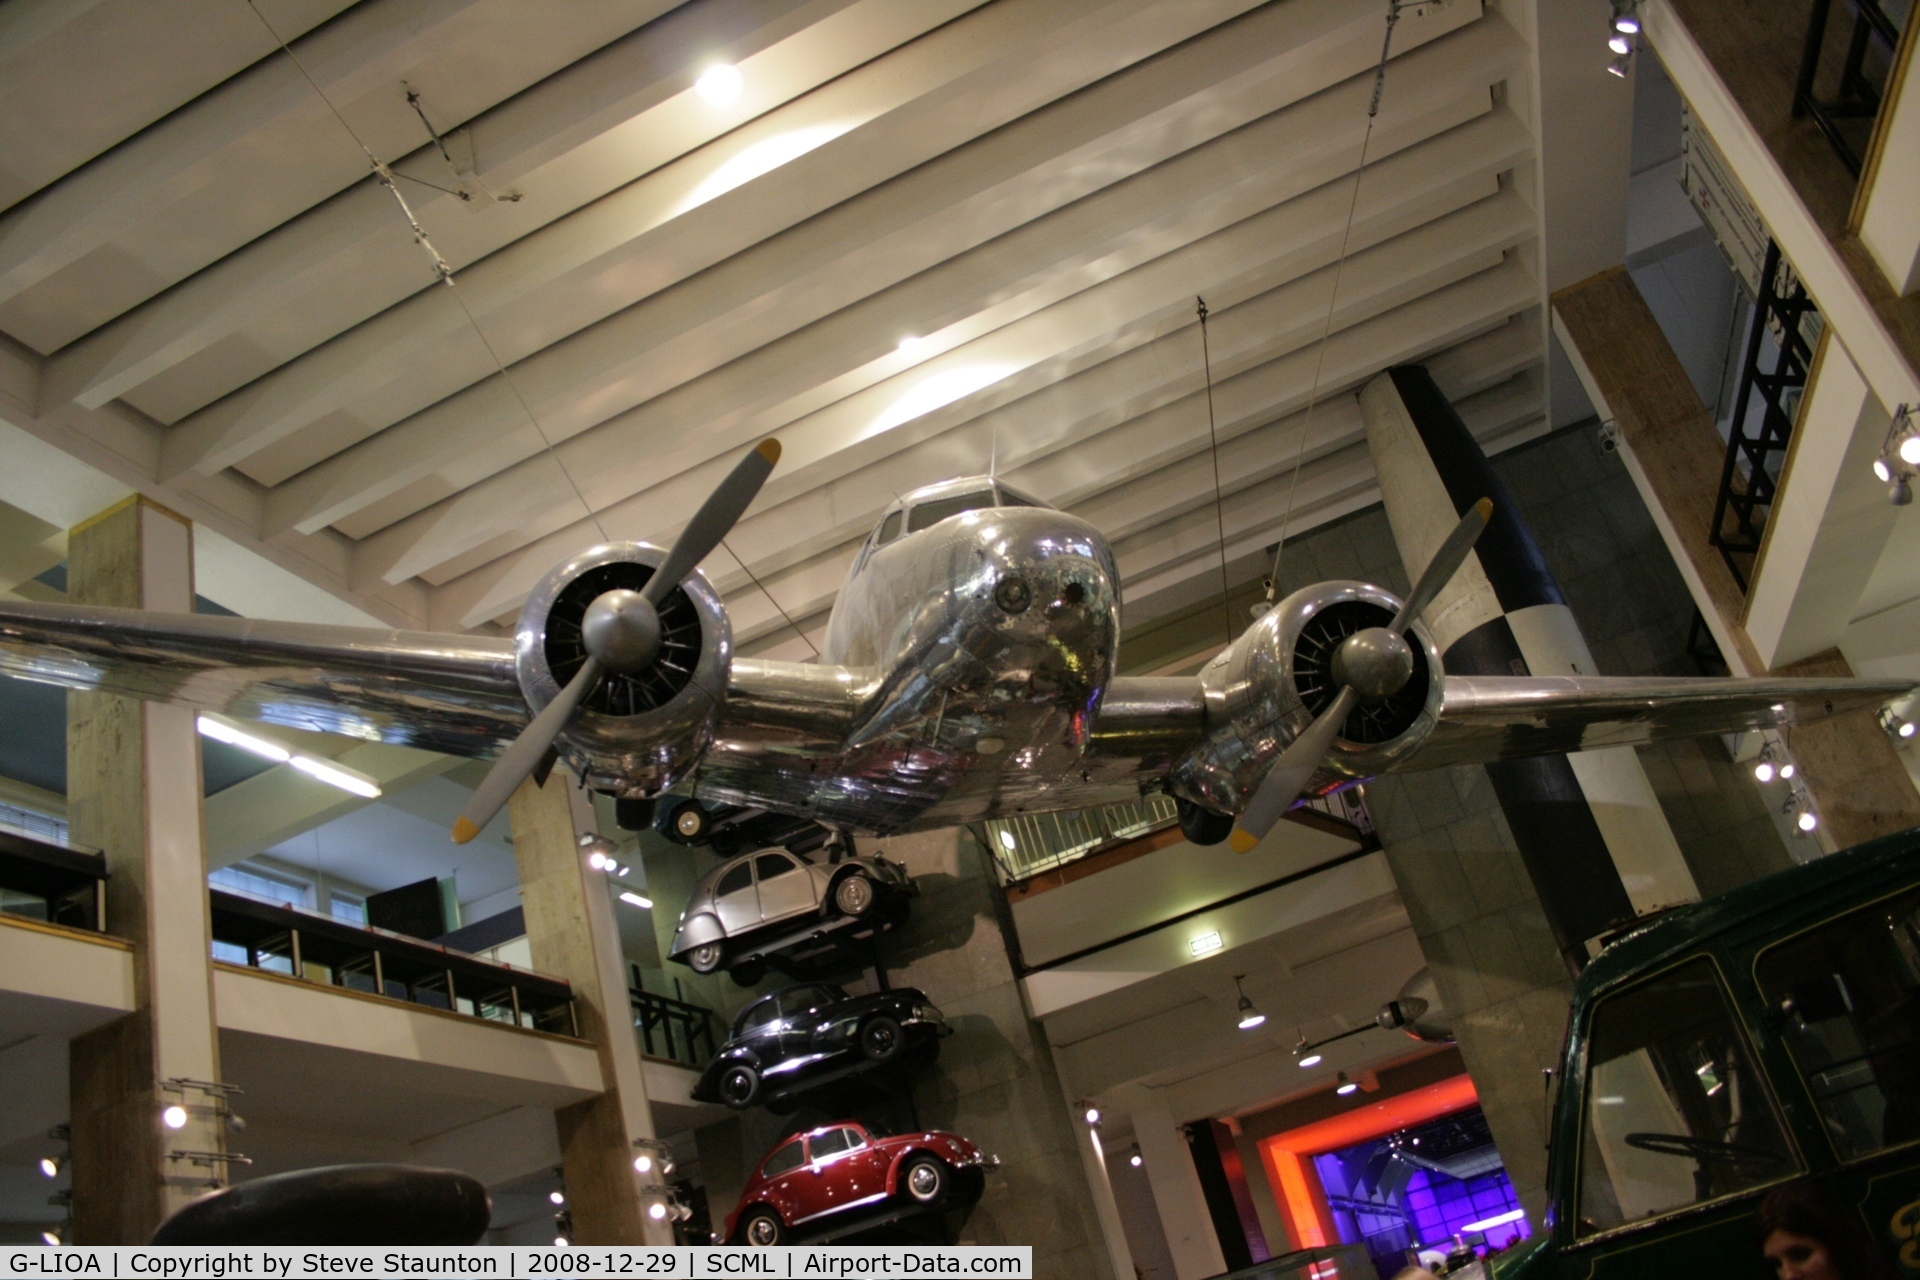 G-LIOA, Lockheed Electra 10-A C/N 1037, Taken at the Science Museum, London. December 2008